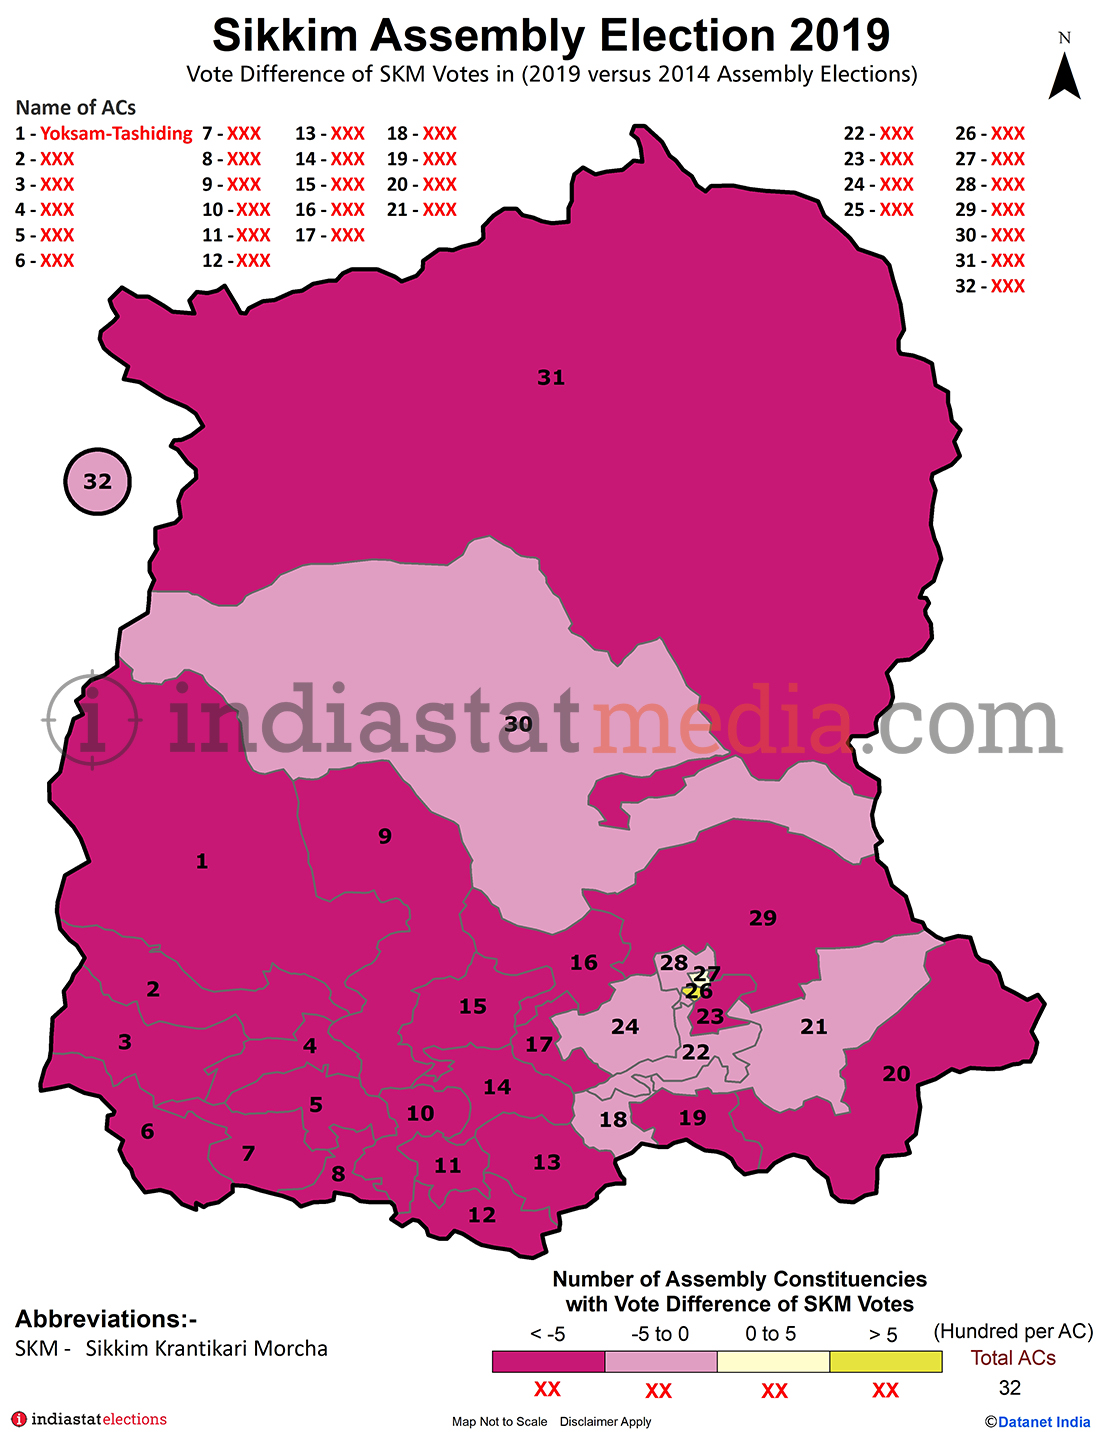 Assembly Constituencies with Vote Difference of SKM Votes in Sikkim (Assembly Elections - 2014 & 2019)